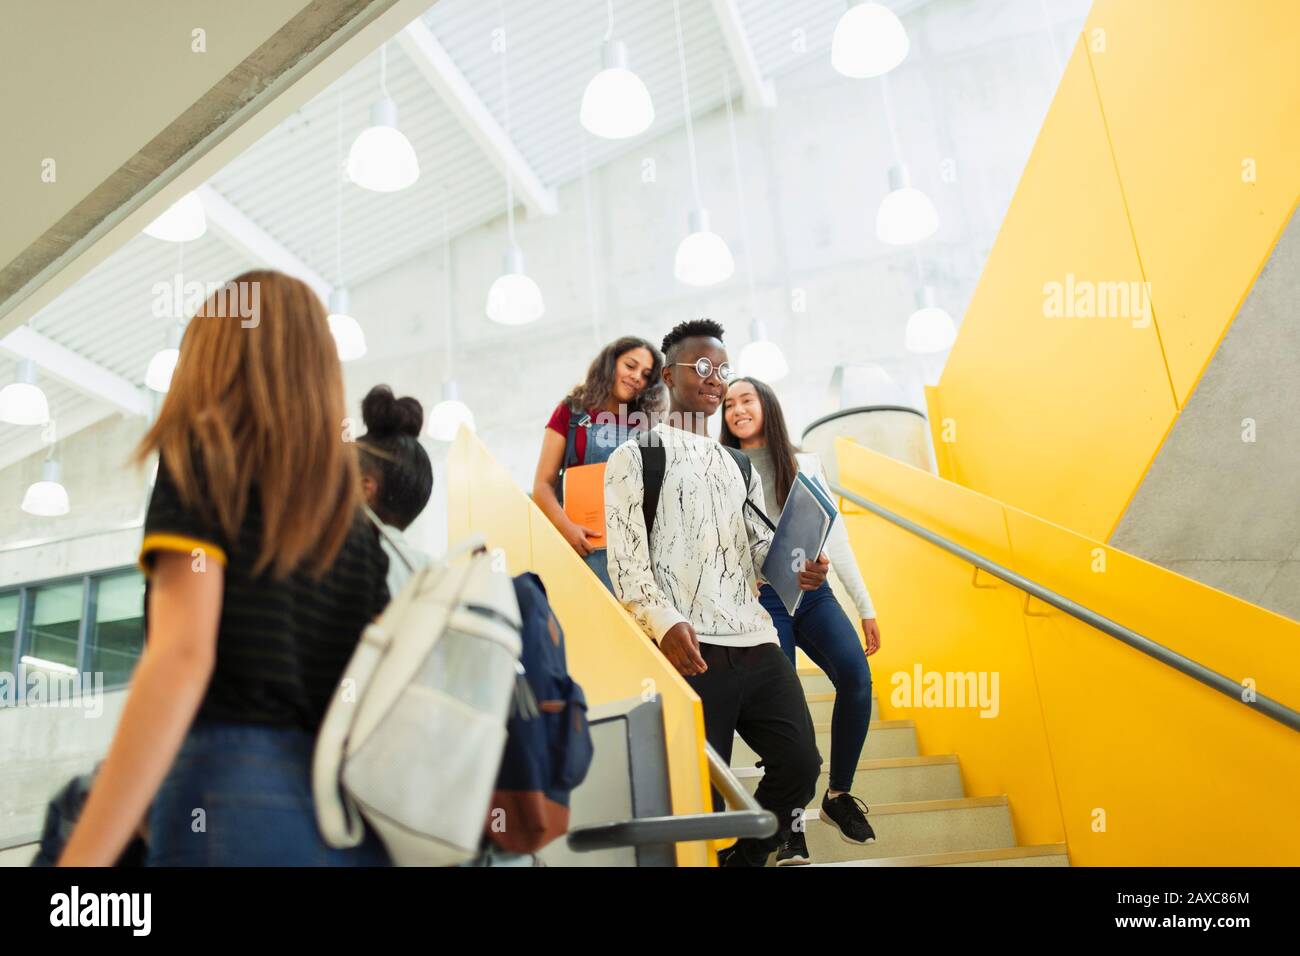 Junior high students descending stairs Stock Photo